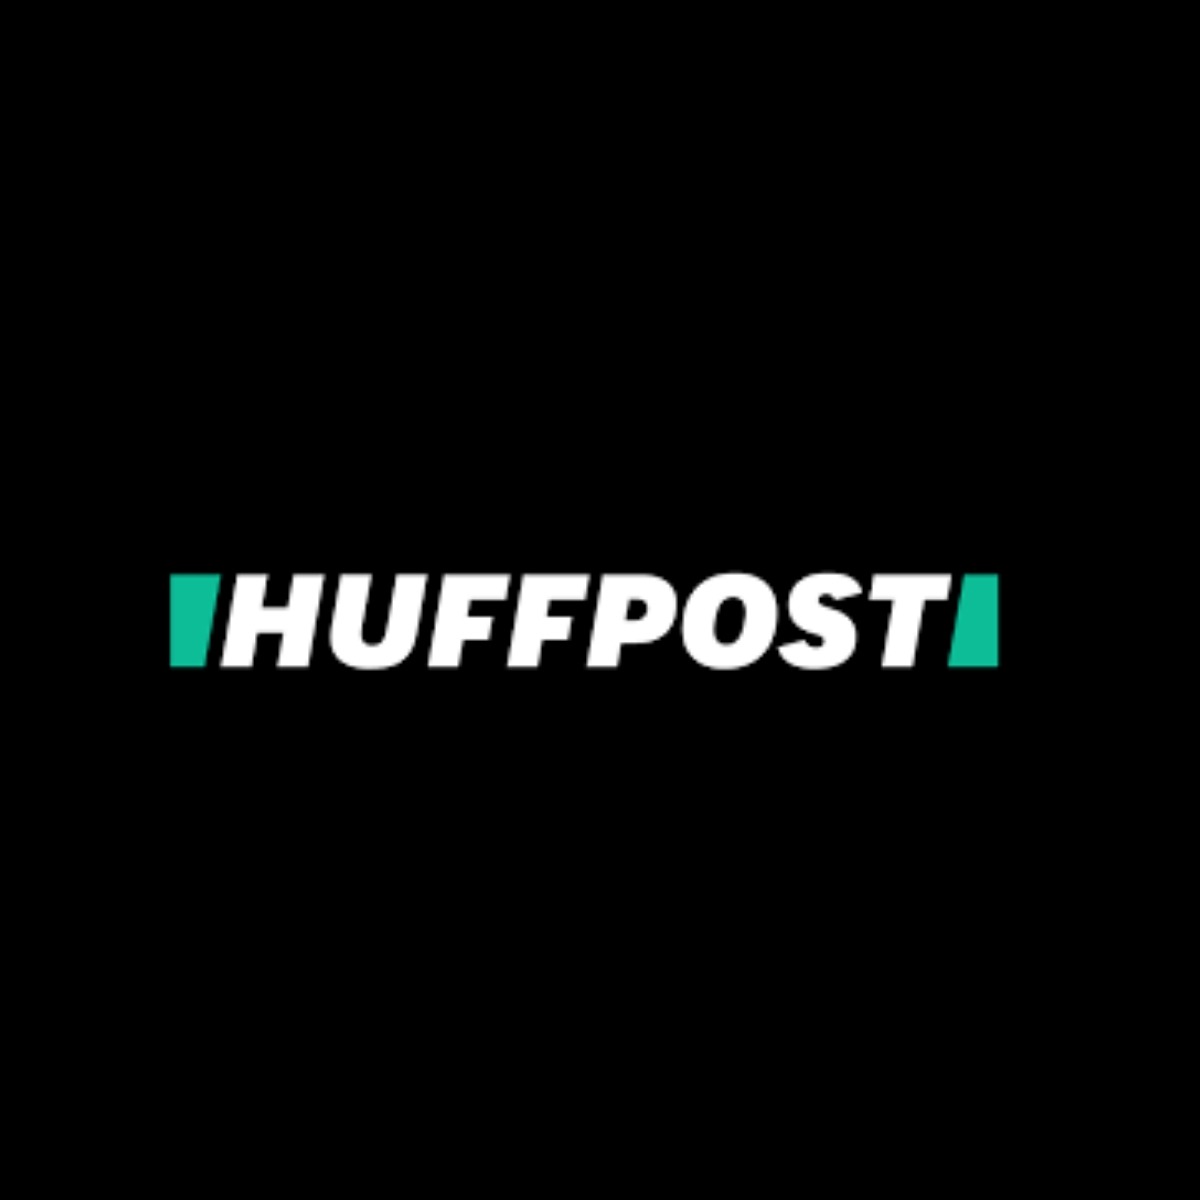 huffington-post-boys-can-be-confident-in-themselves-if-men-pave-the-way